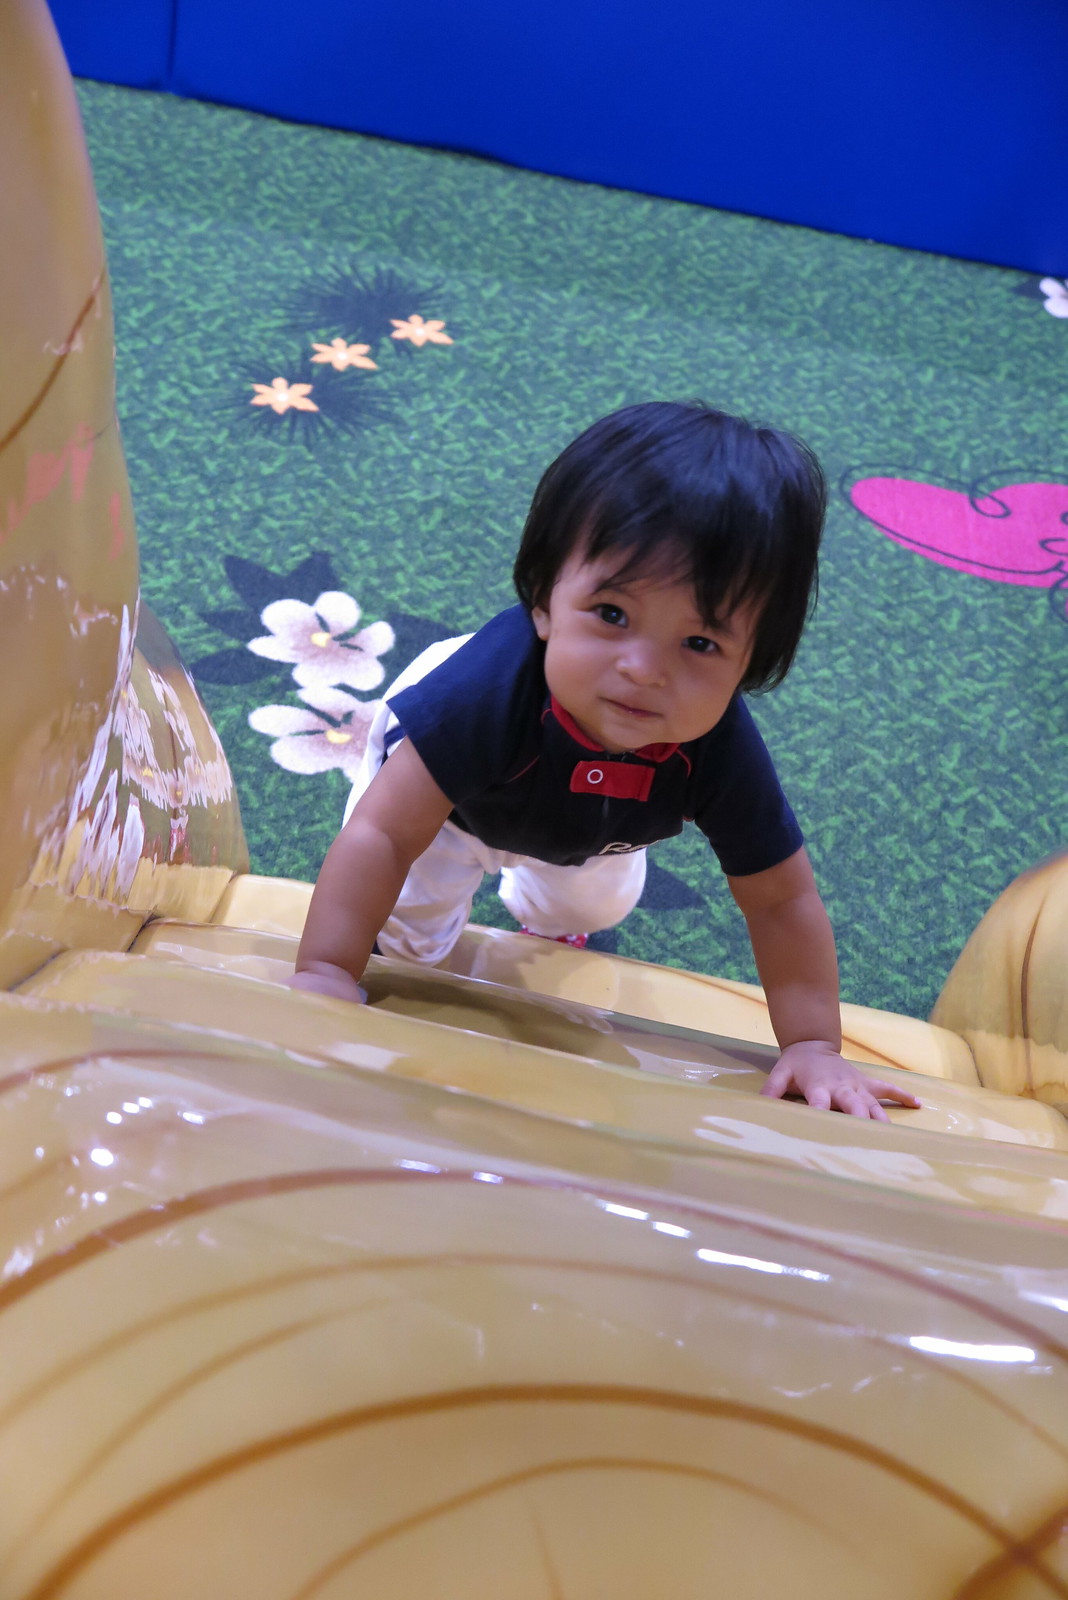 Aug 9, 2014 - Playtime at Safra Toa Payoh